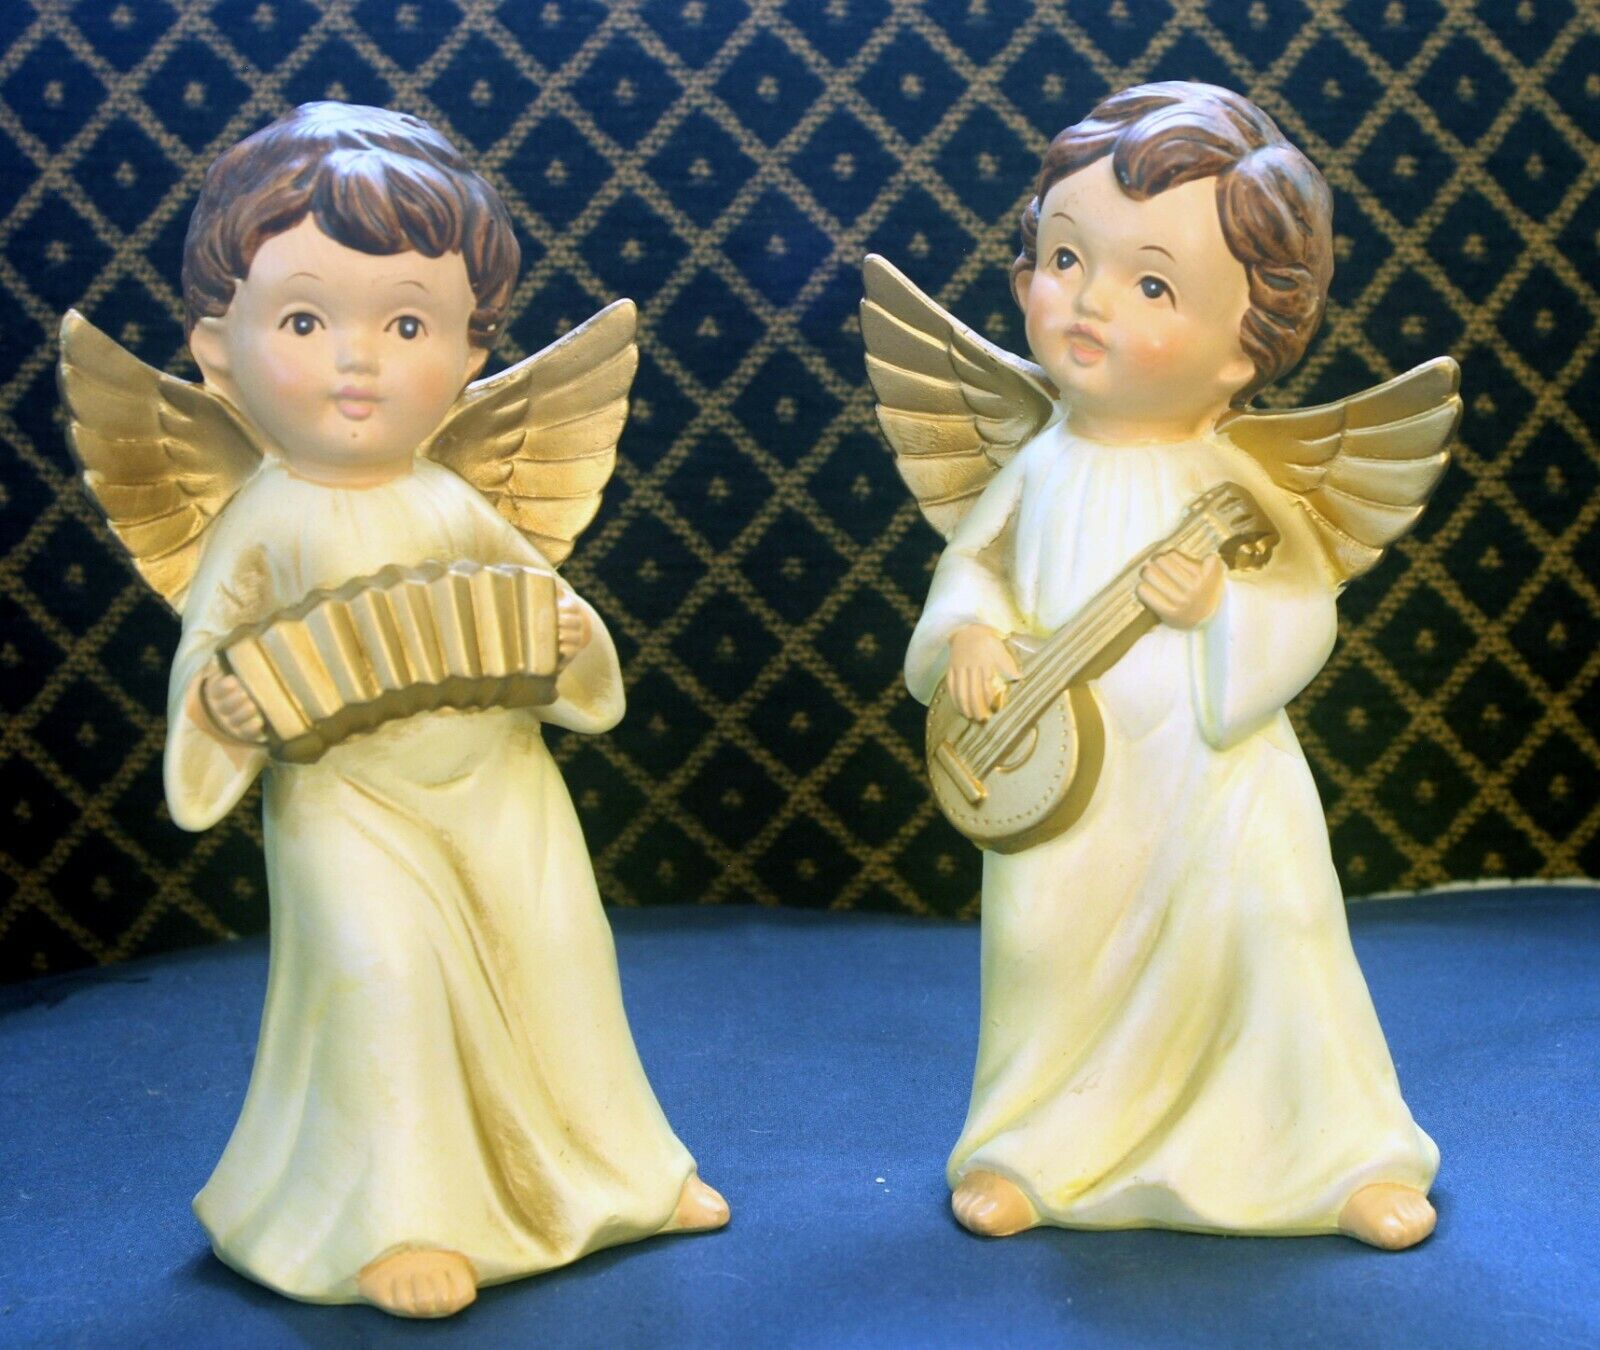 VTG Colonial Candle Set of ceramic Angel/musicians - approx 6.5\